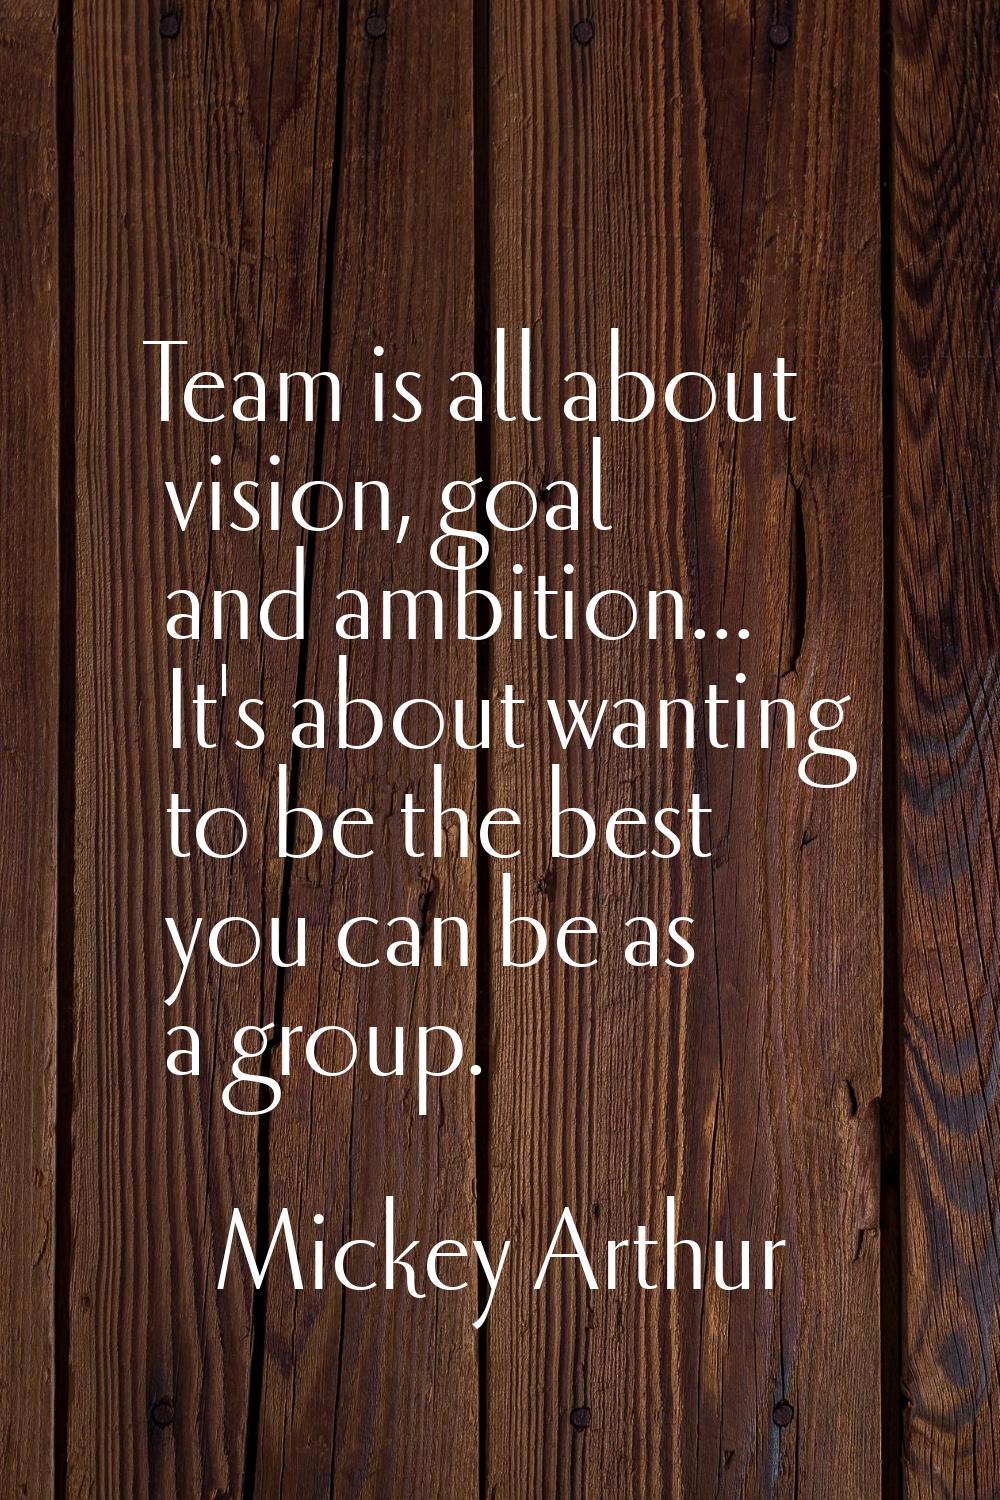 Team is all about vision, goal and ambition... It's about wanting to be the best you can be as a gr